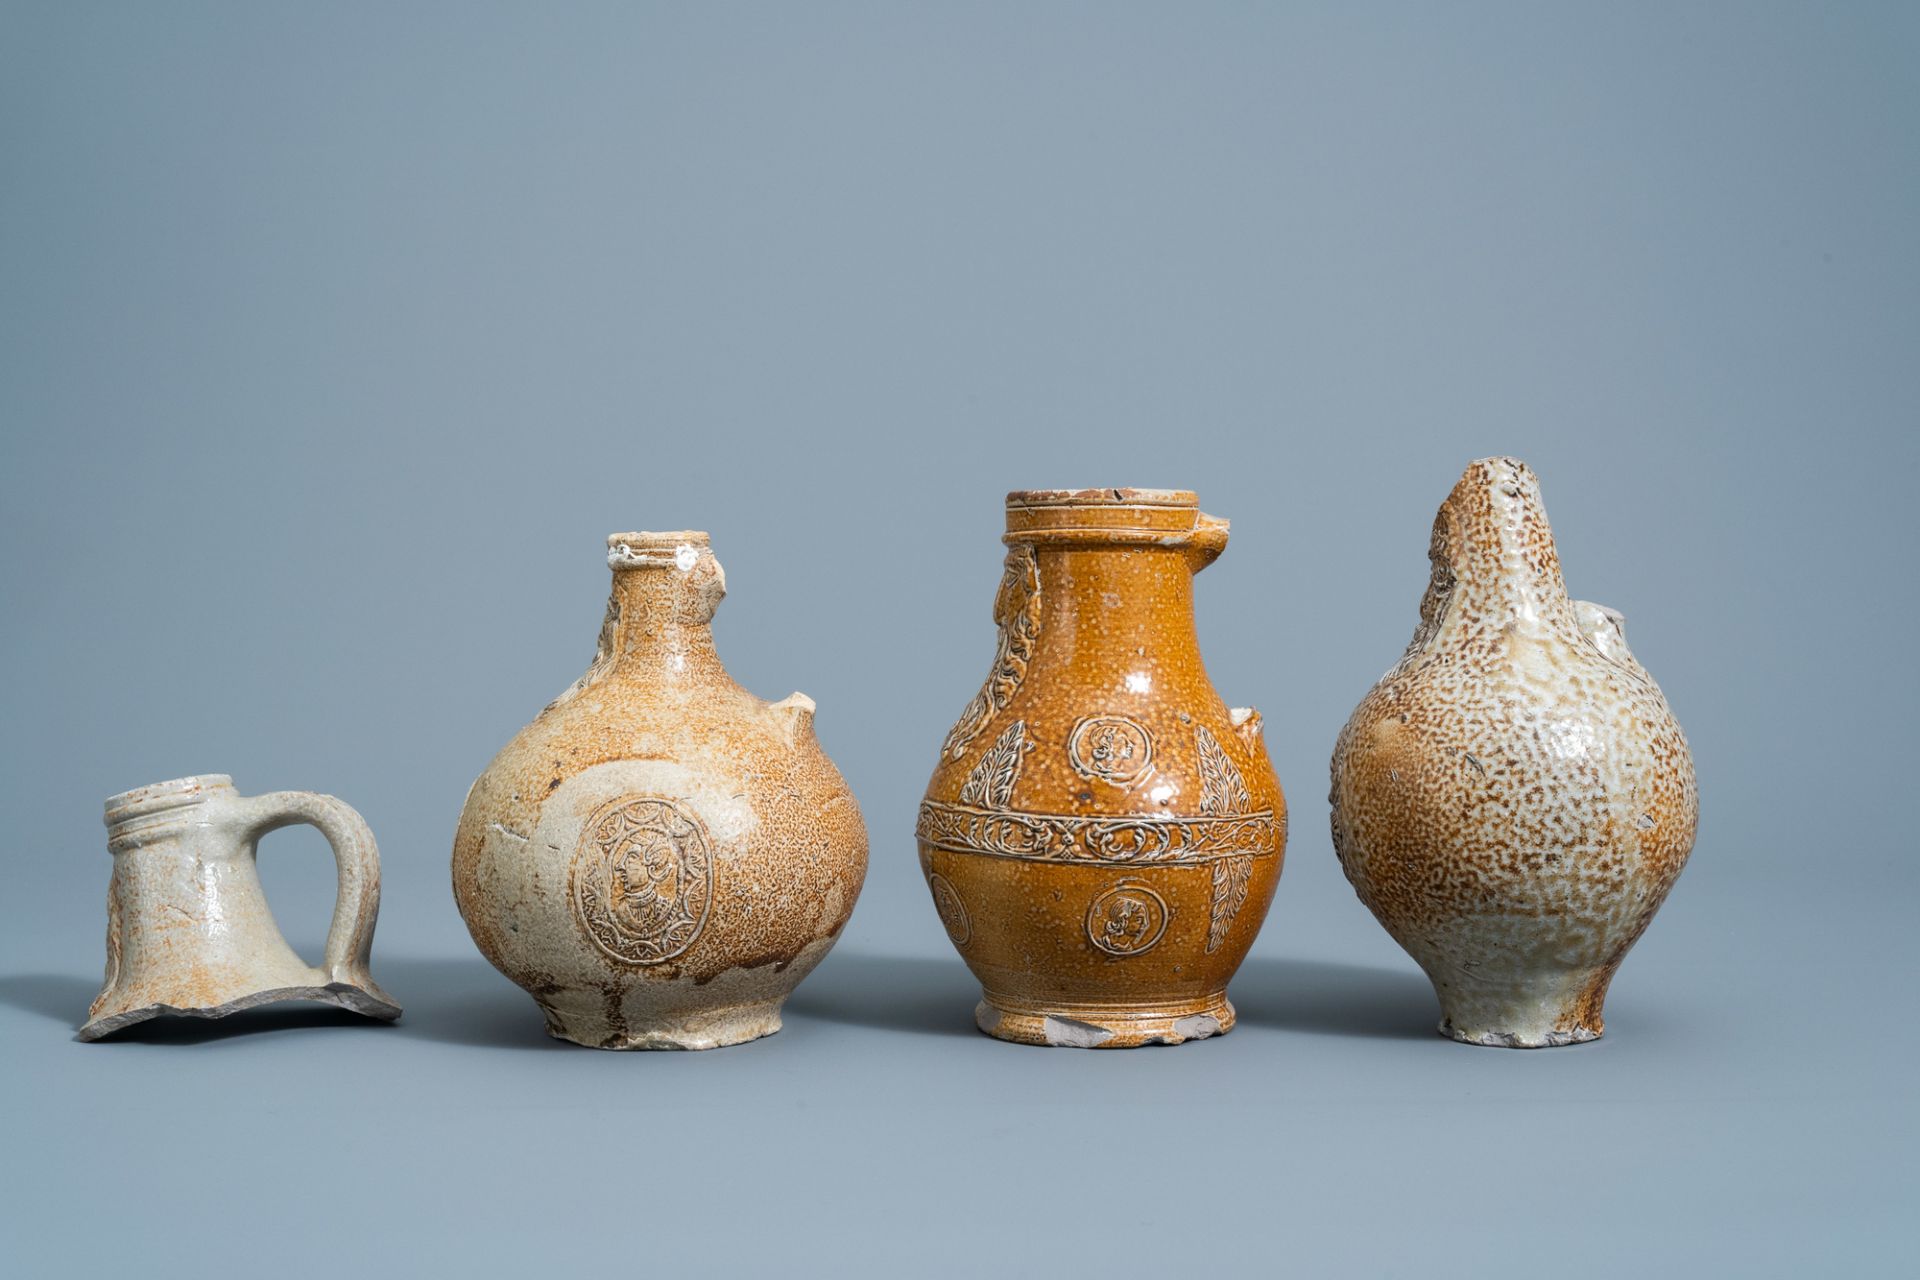 Three German stoneware bellarmine jugs and a neck fragment, 16th/17th C. - Image 3 of 8